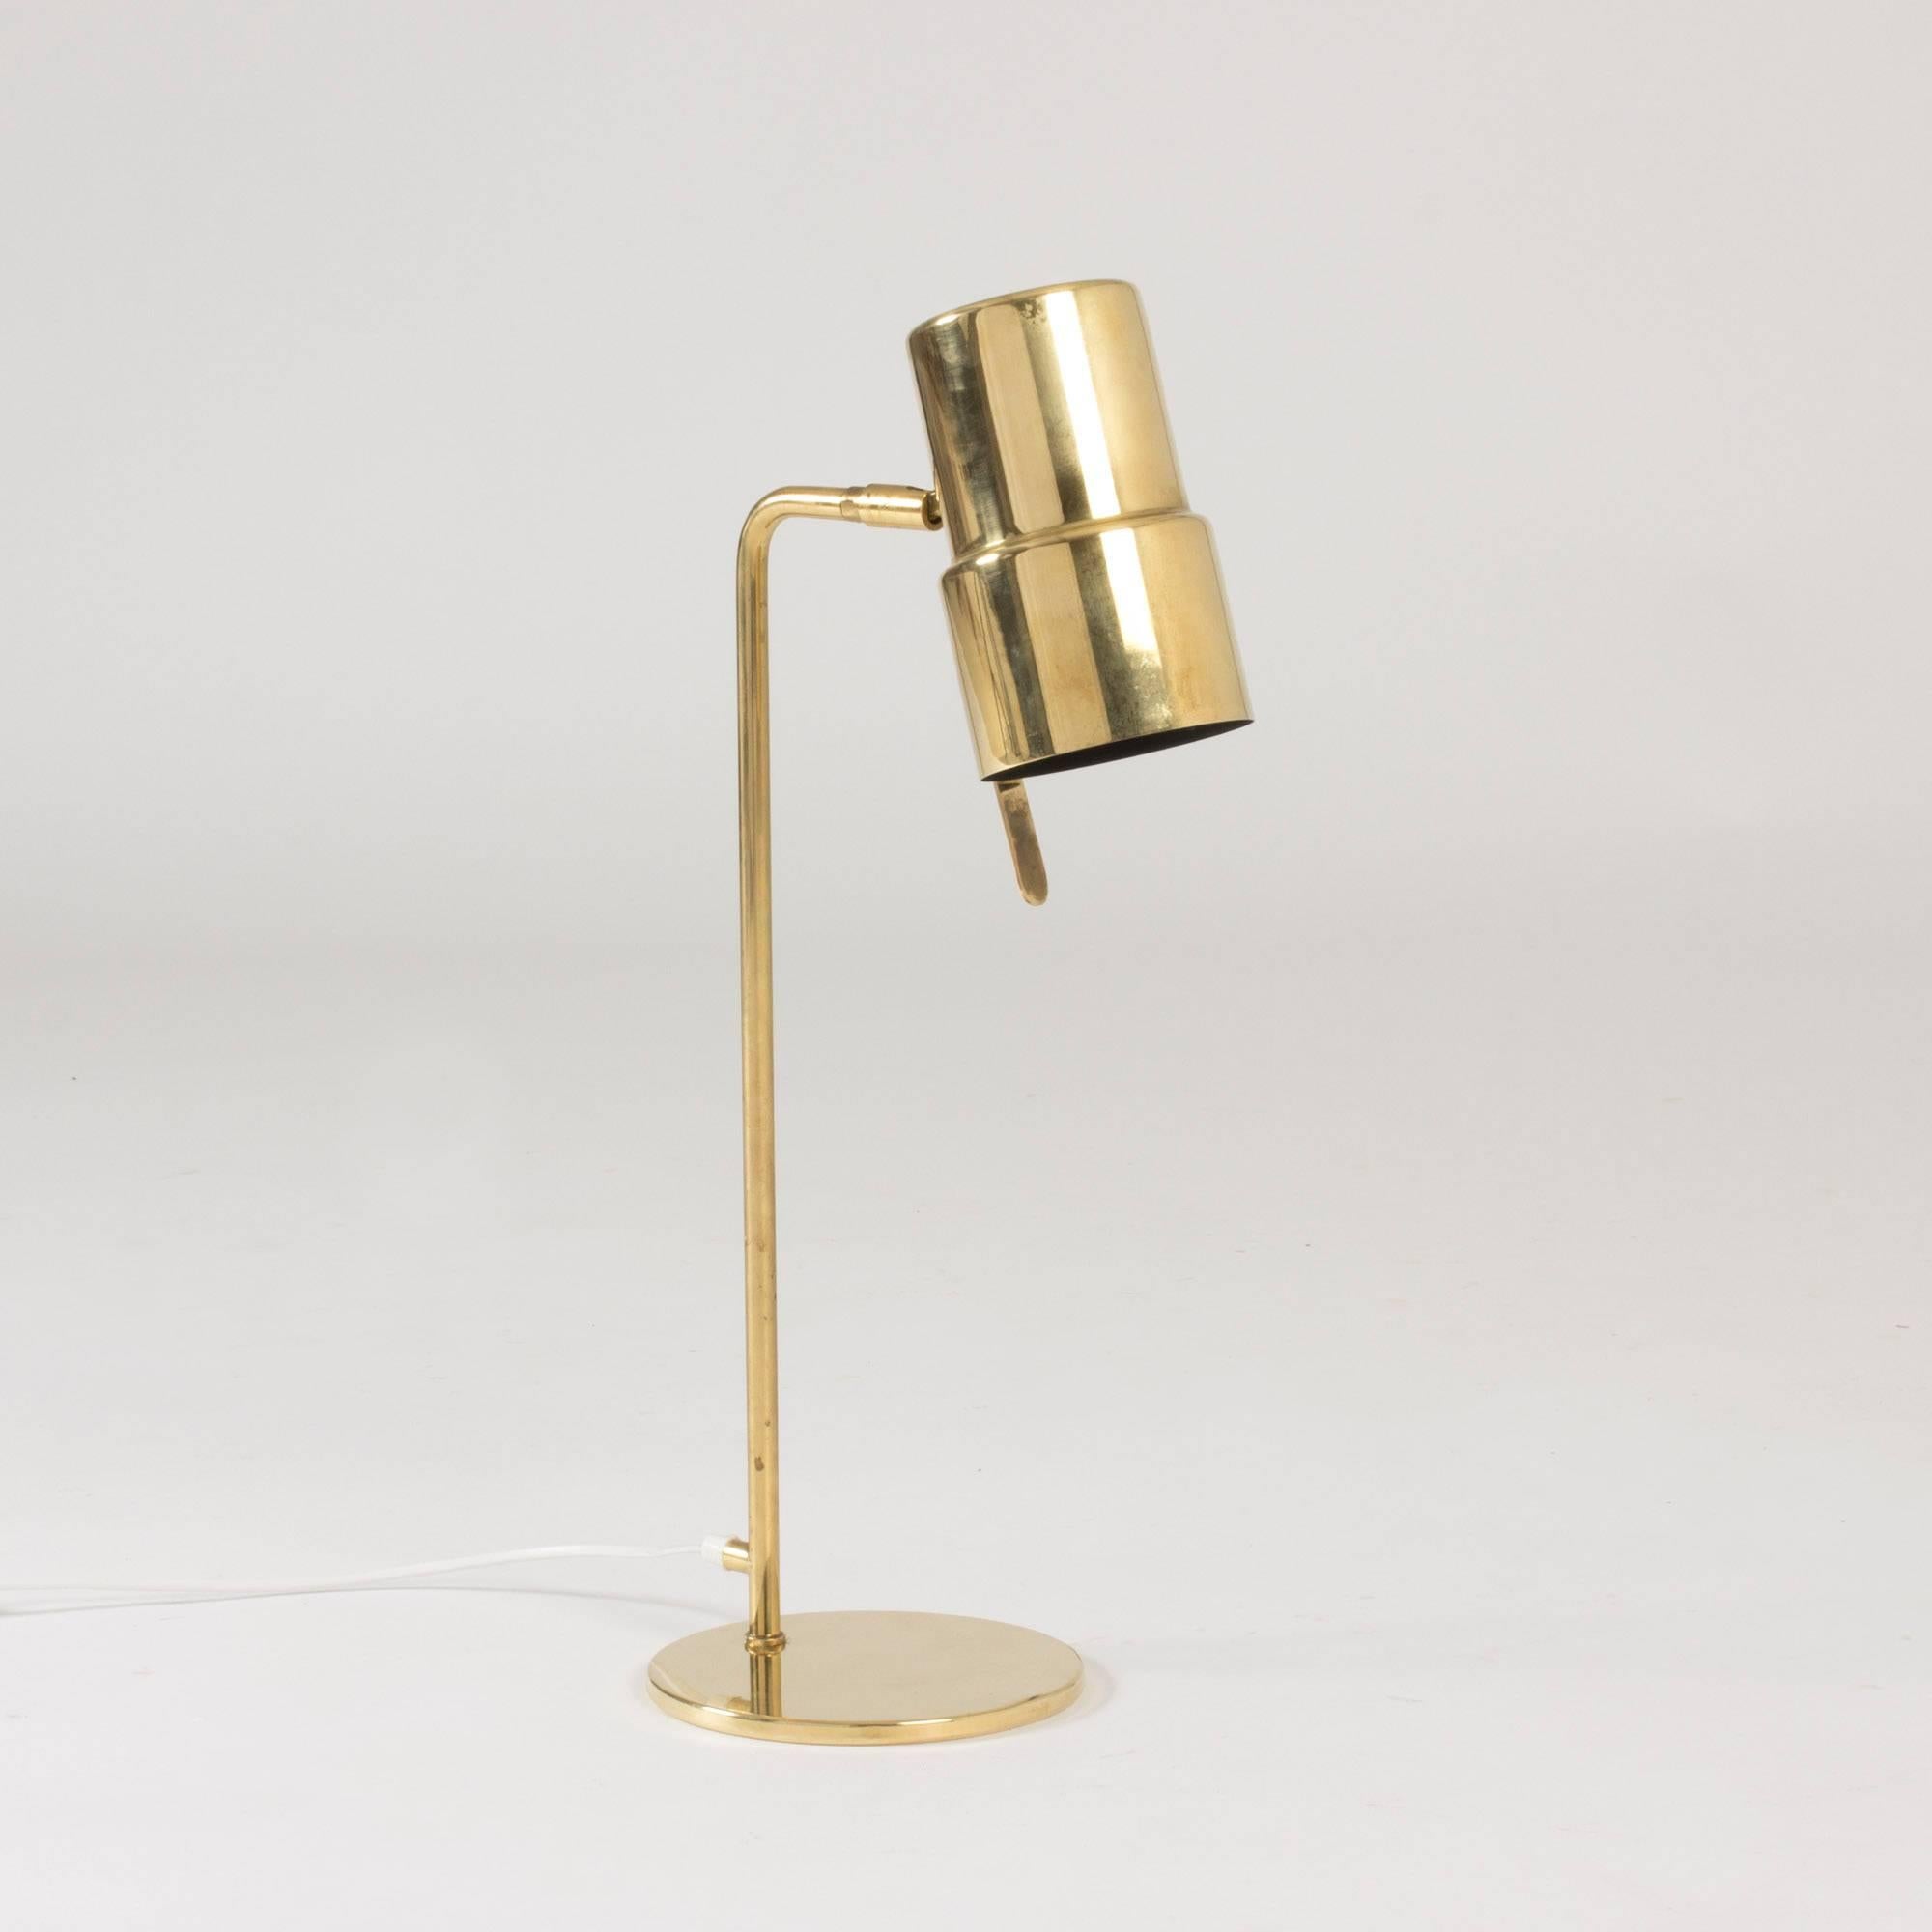 Very cool, tall brass table or desk lamp by Hans-Agne Jakobsson with an adjustable shade. Nice heavy base.